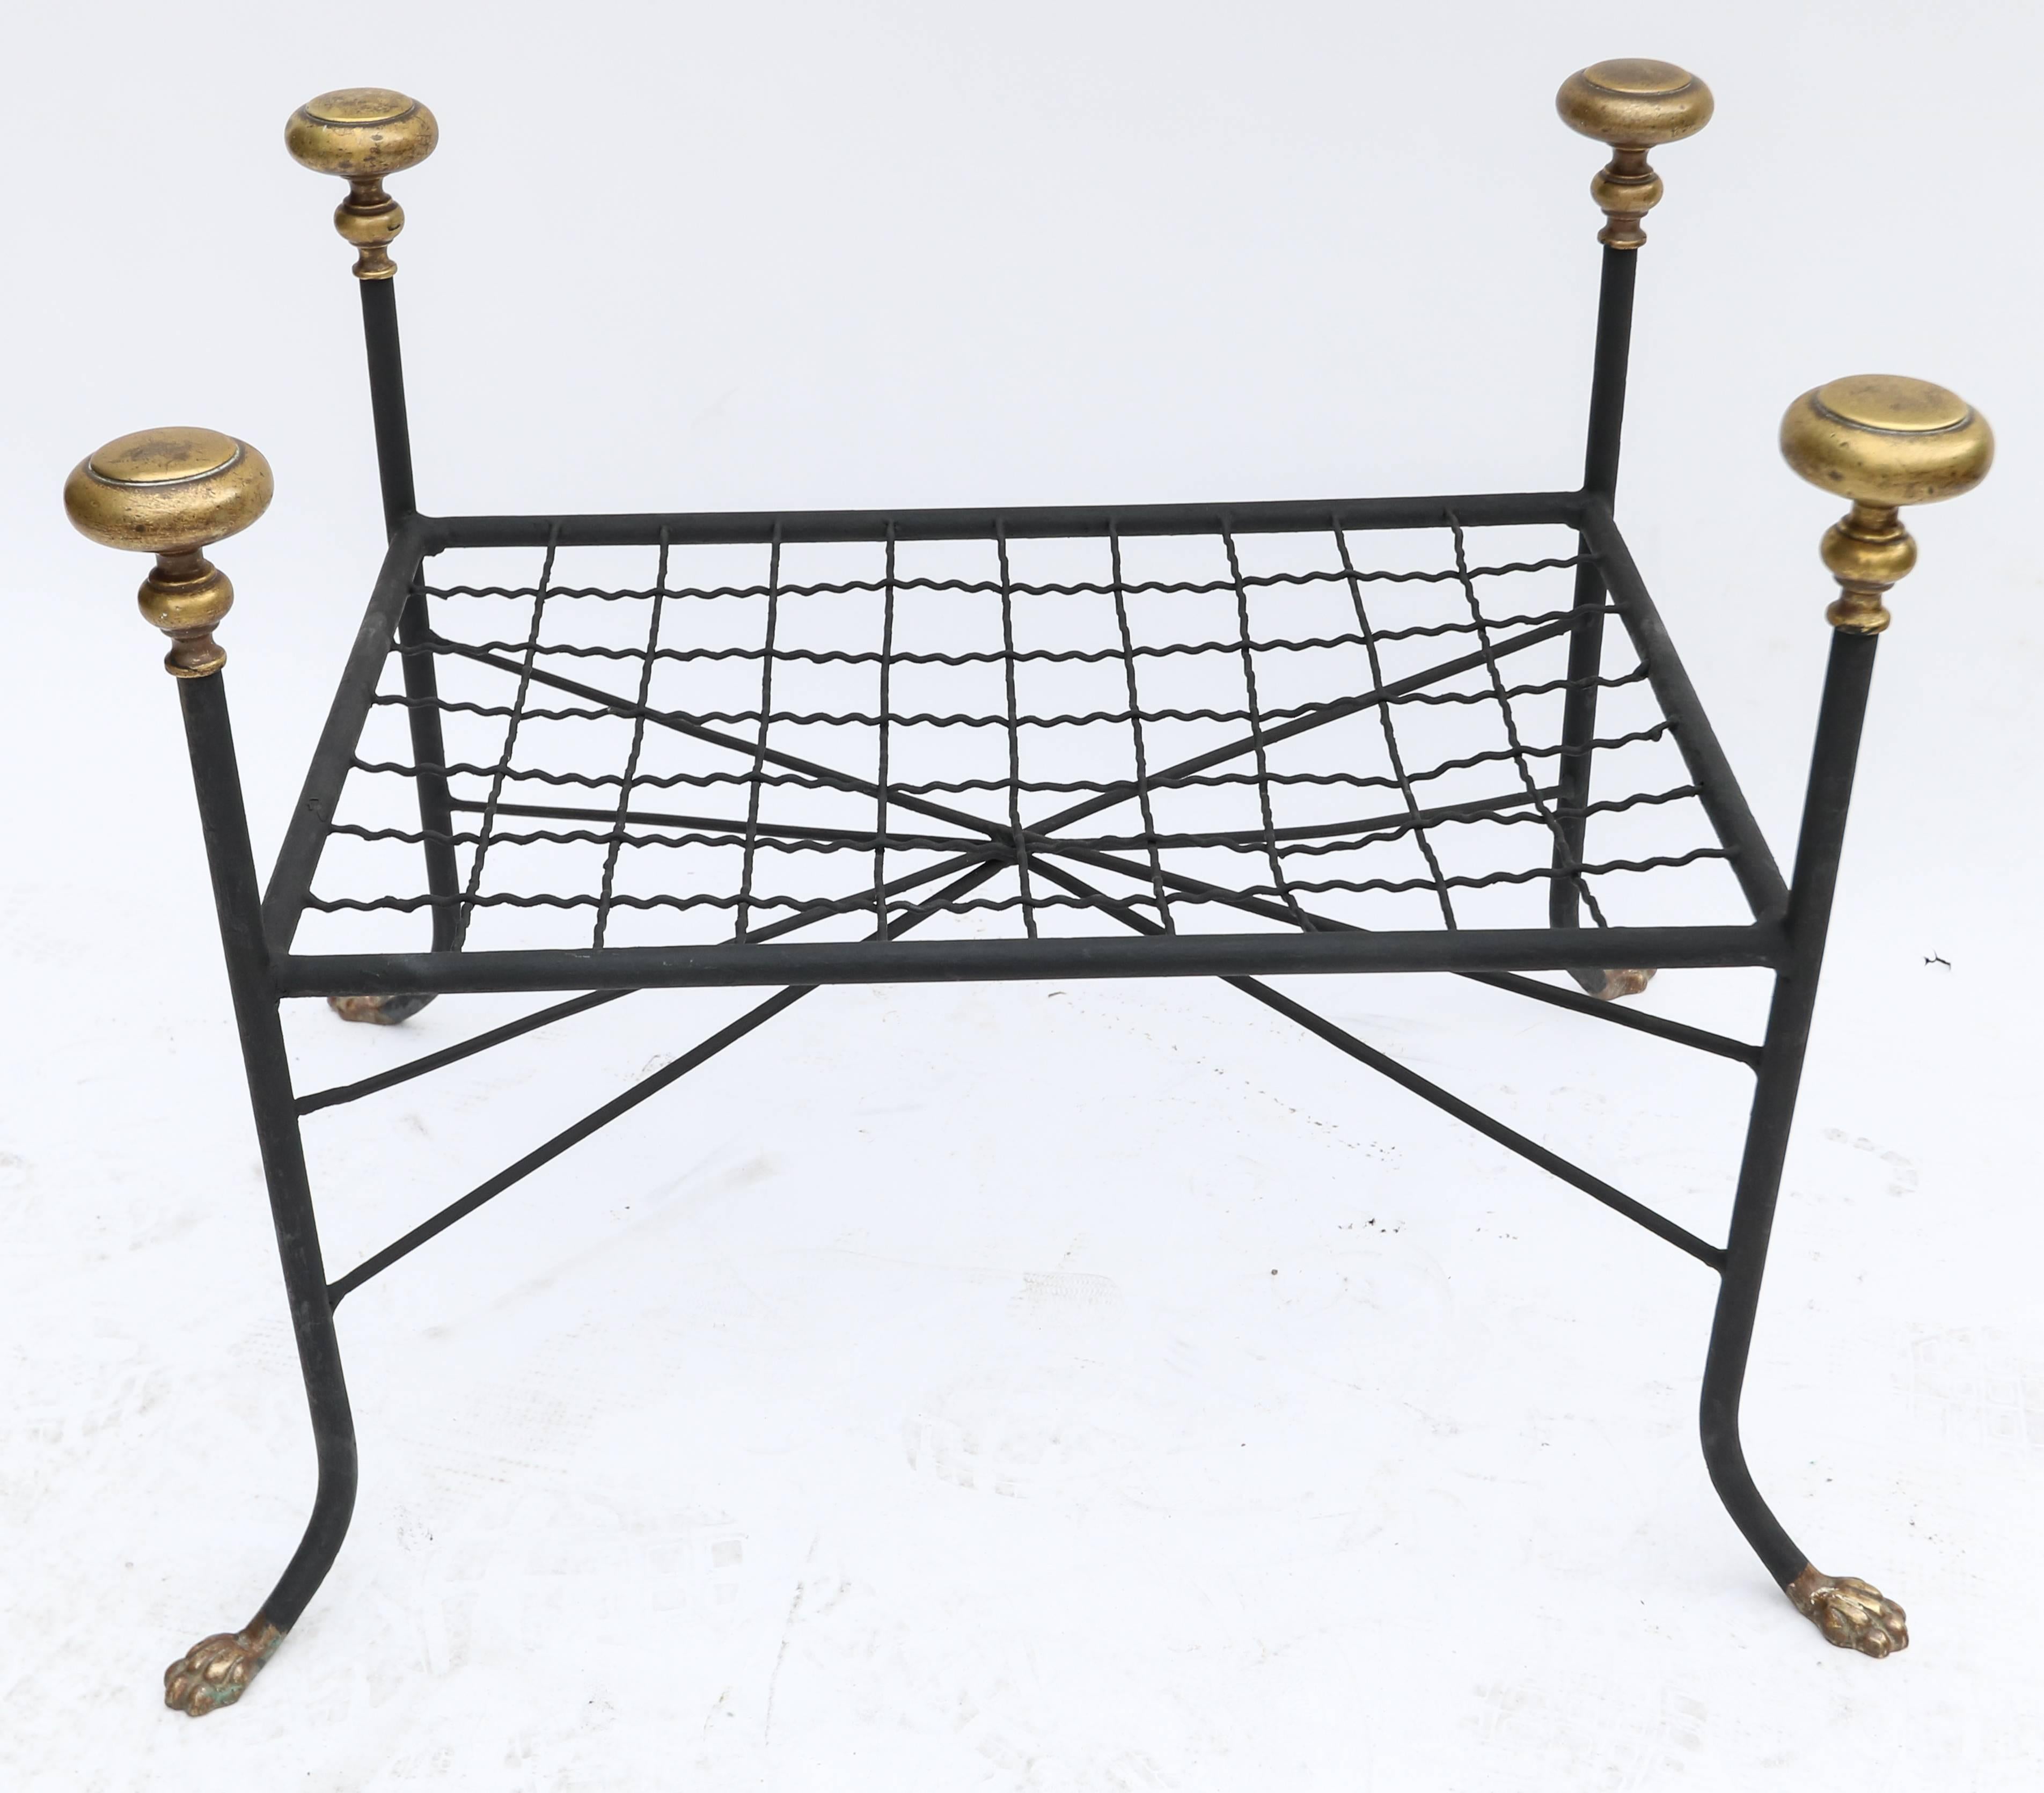 Black metal bench or stool with decorative brass finials and claw feet.